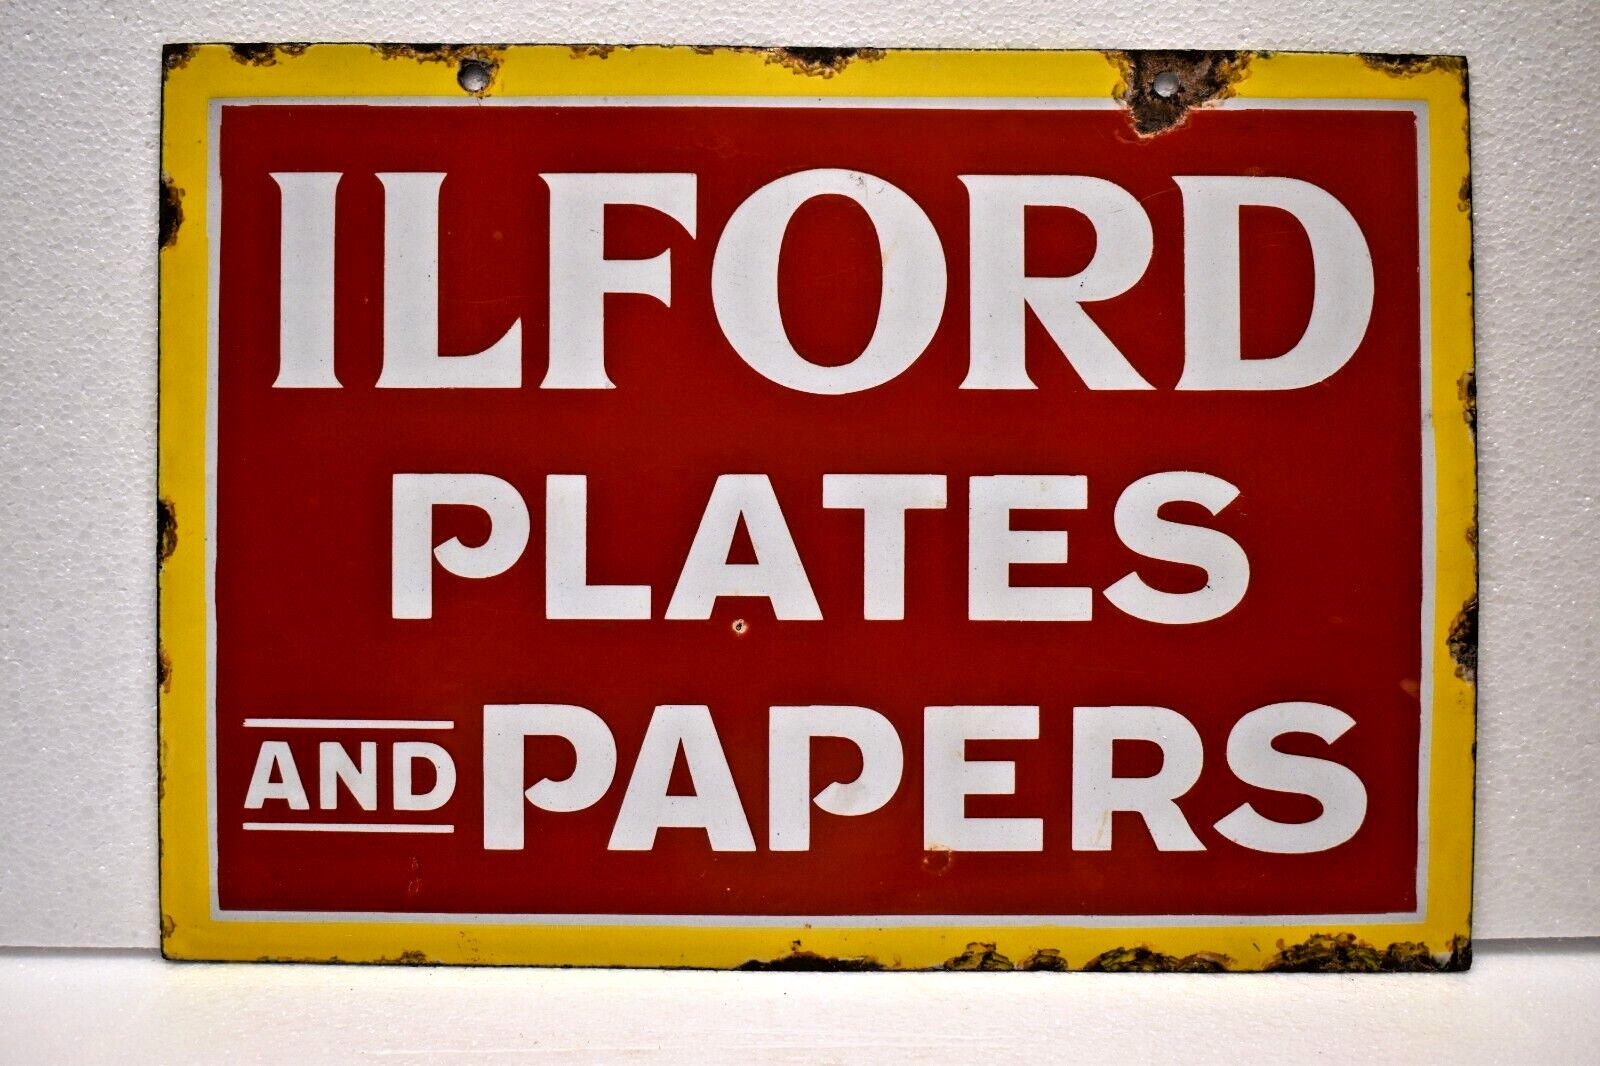 Vintage Porcelain Enamel Sign ILFORD Films Camera Roll Double Sided Advertising